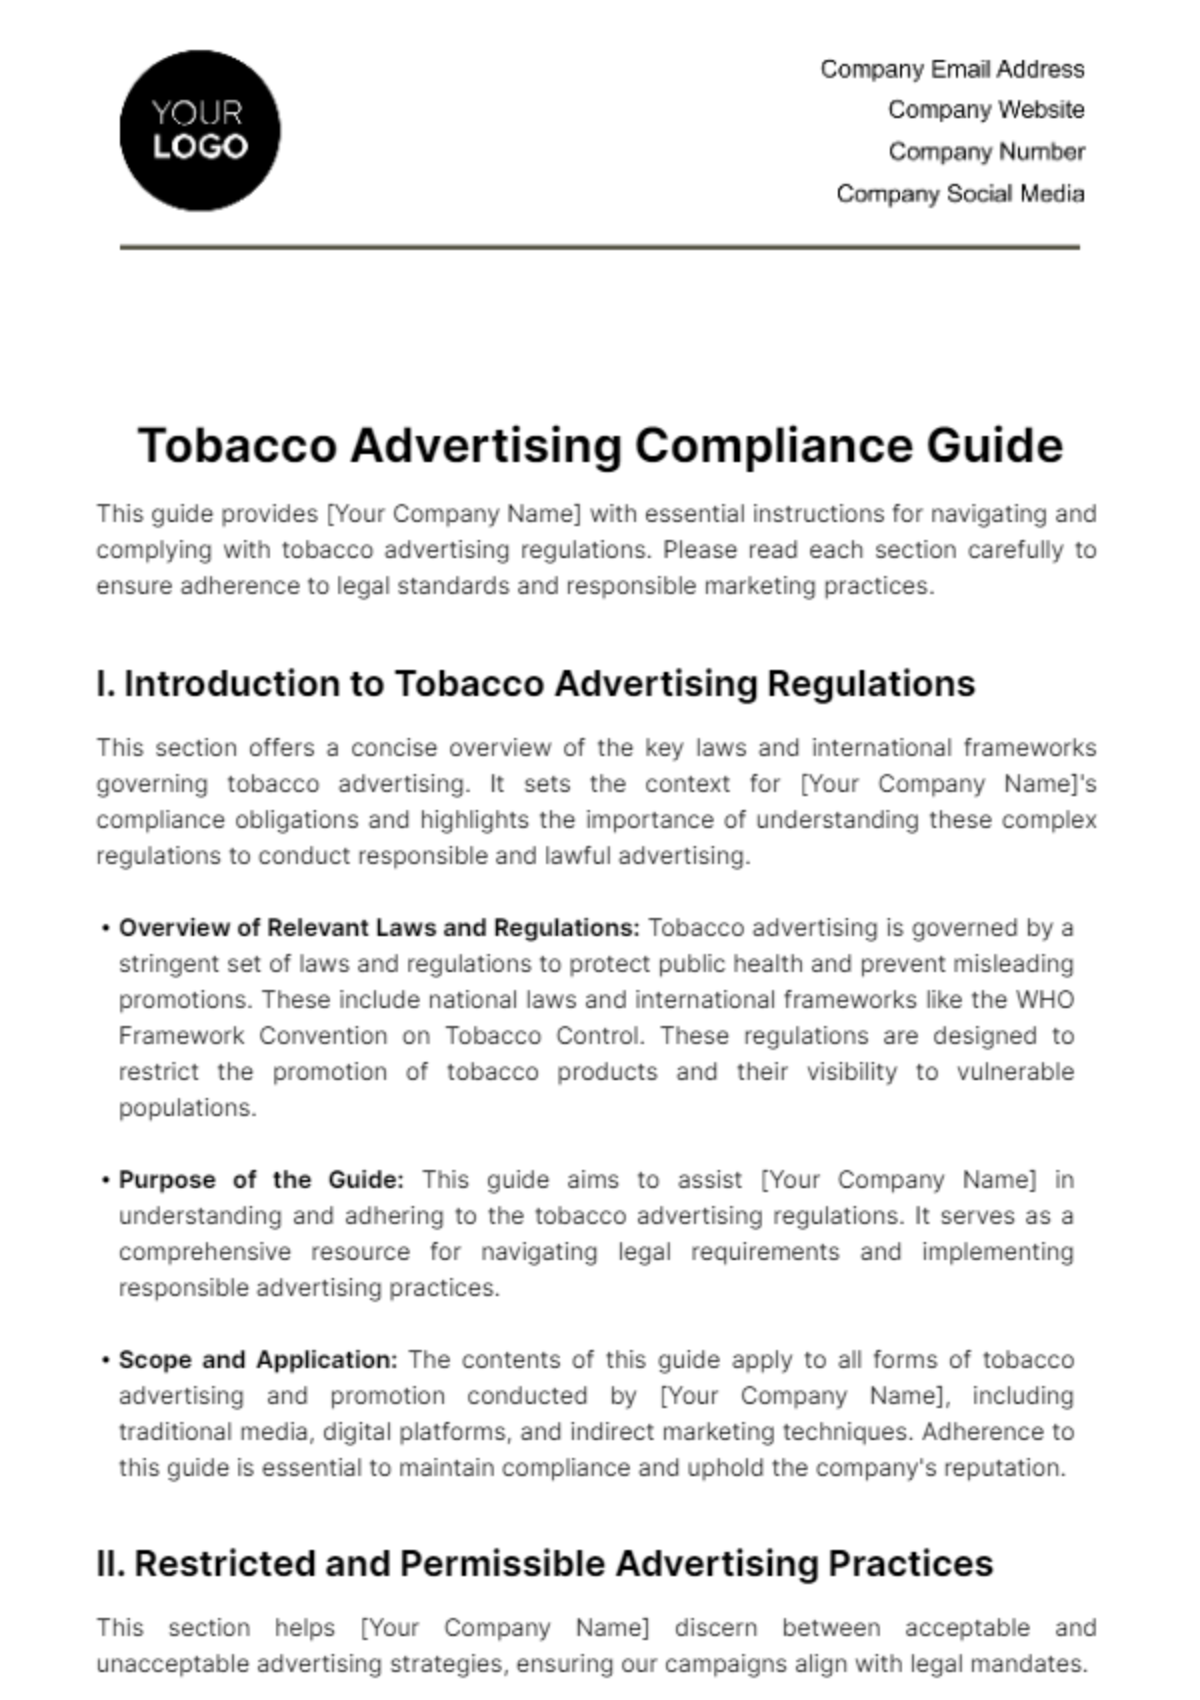 Tobacco Advertising Compliance Guide Template